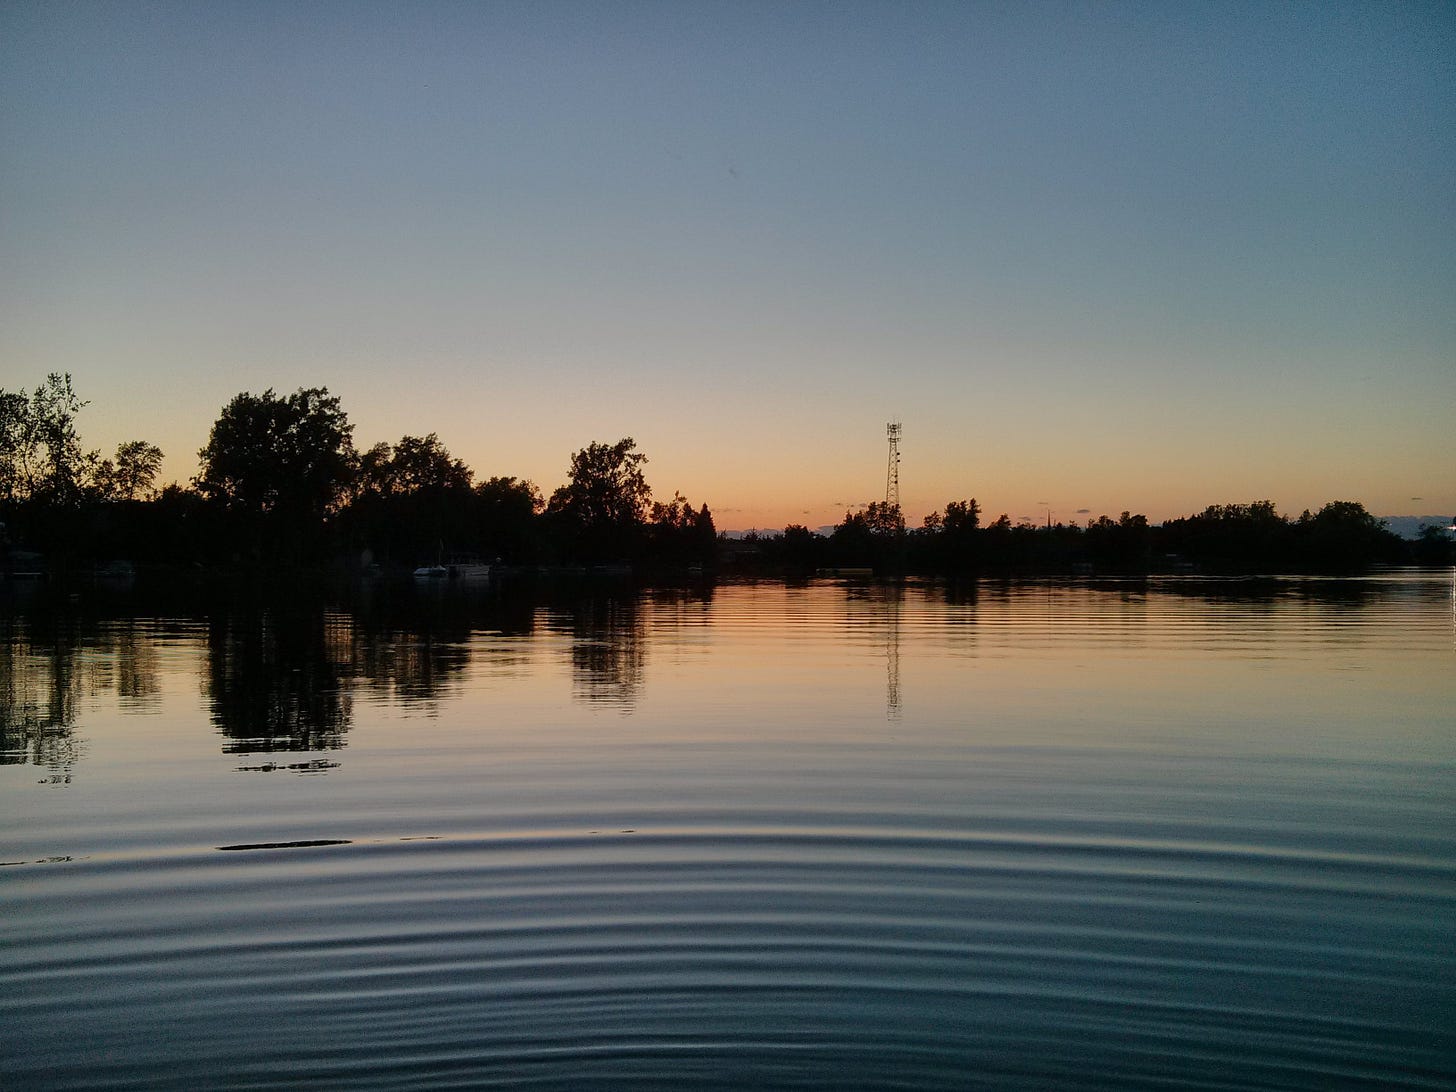 Water ripples out from the position of the camera lens on a lake at dusk, with trees and a cell tower in the distance.